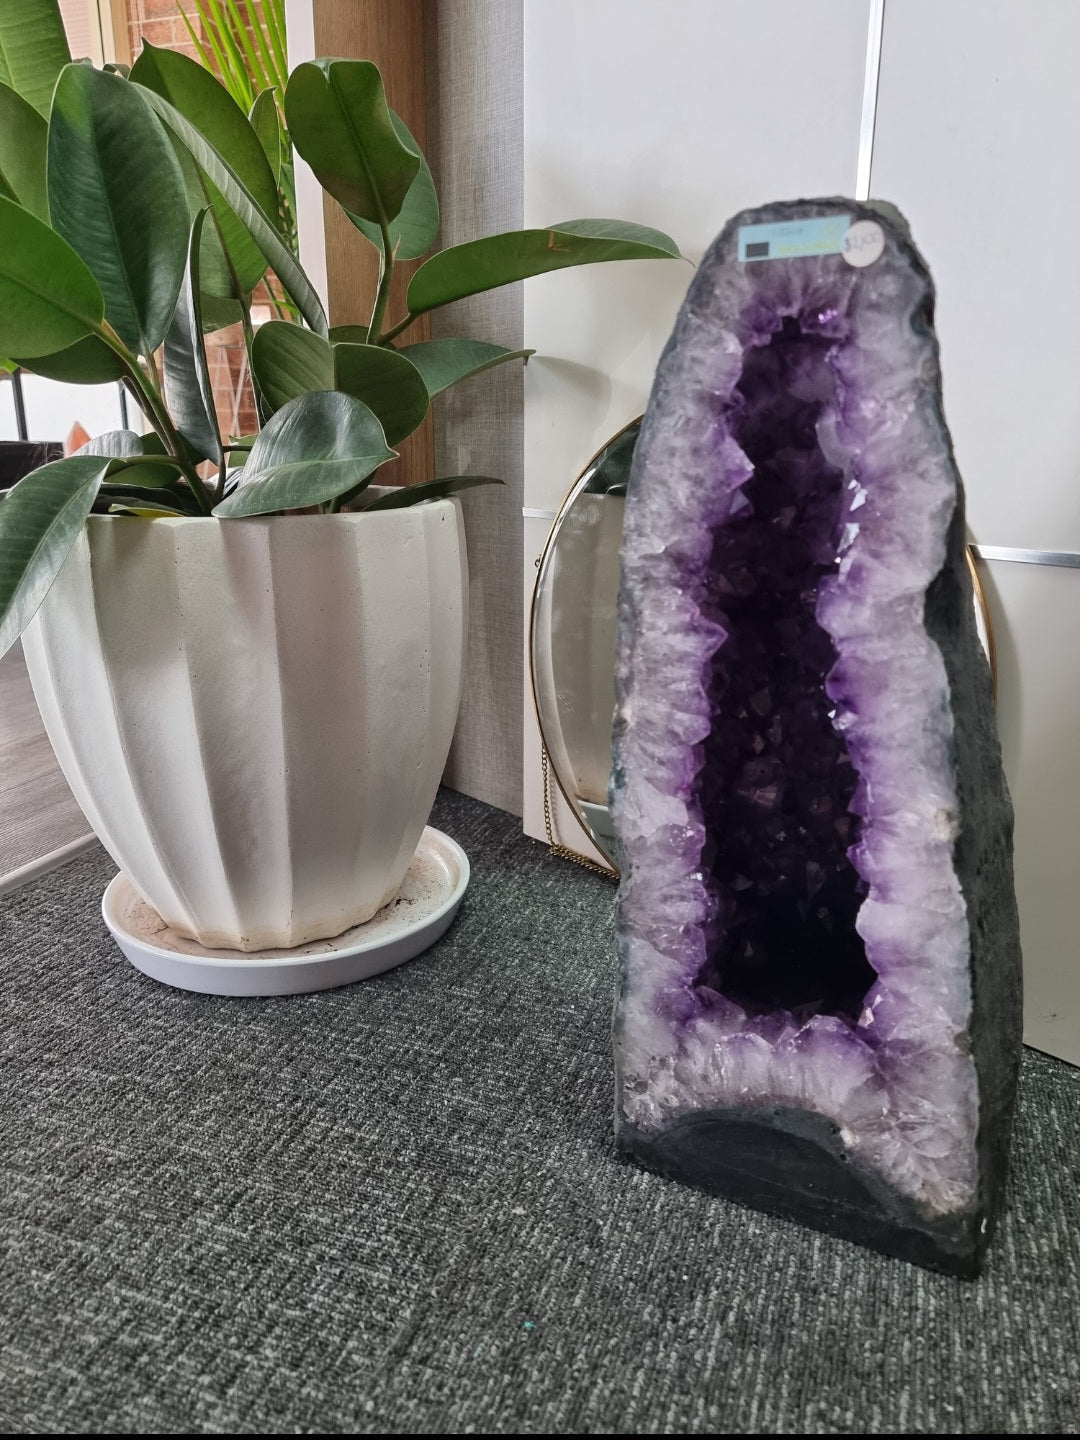 Amethyst cave sold at crystal store in Australia. A purple amethyst cave for healing and house balance.